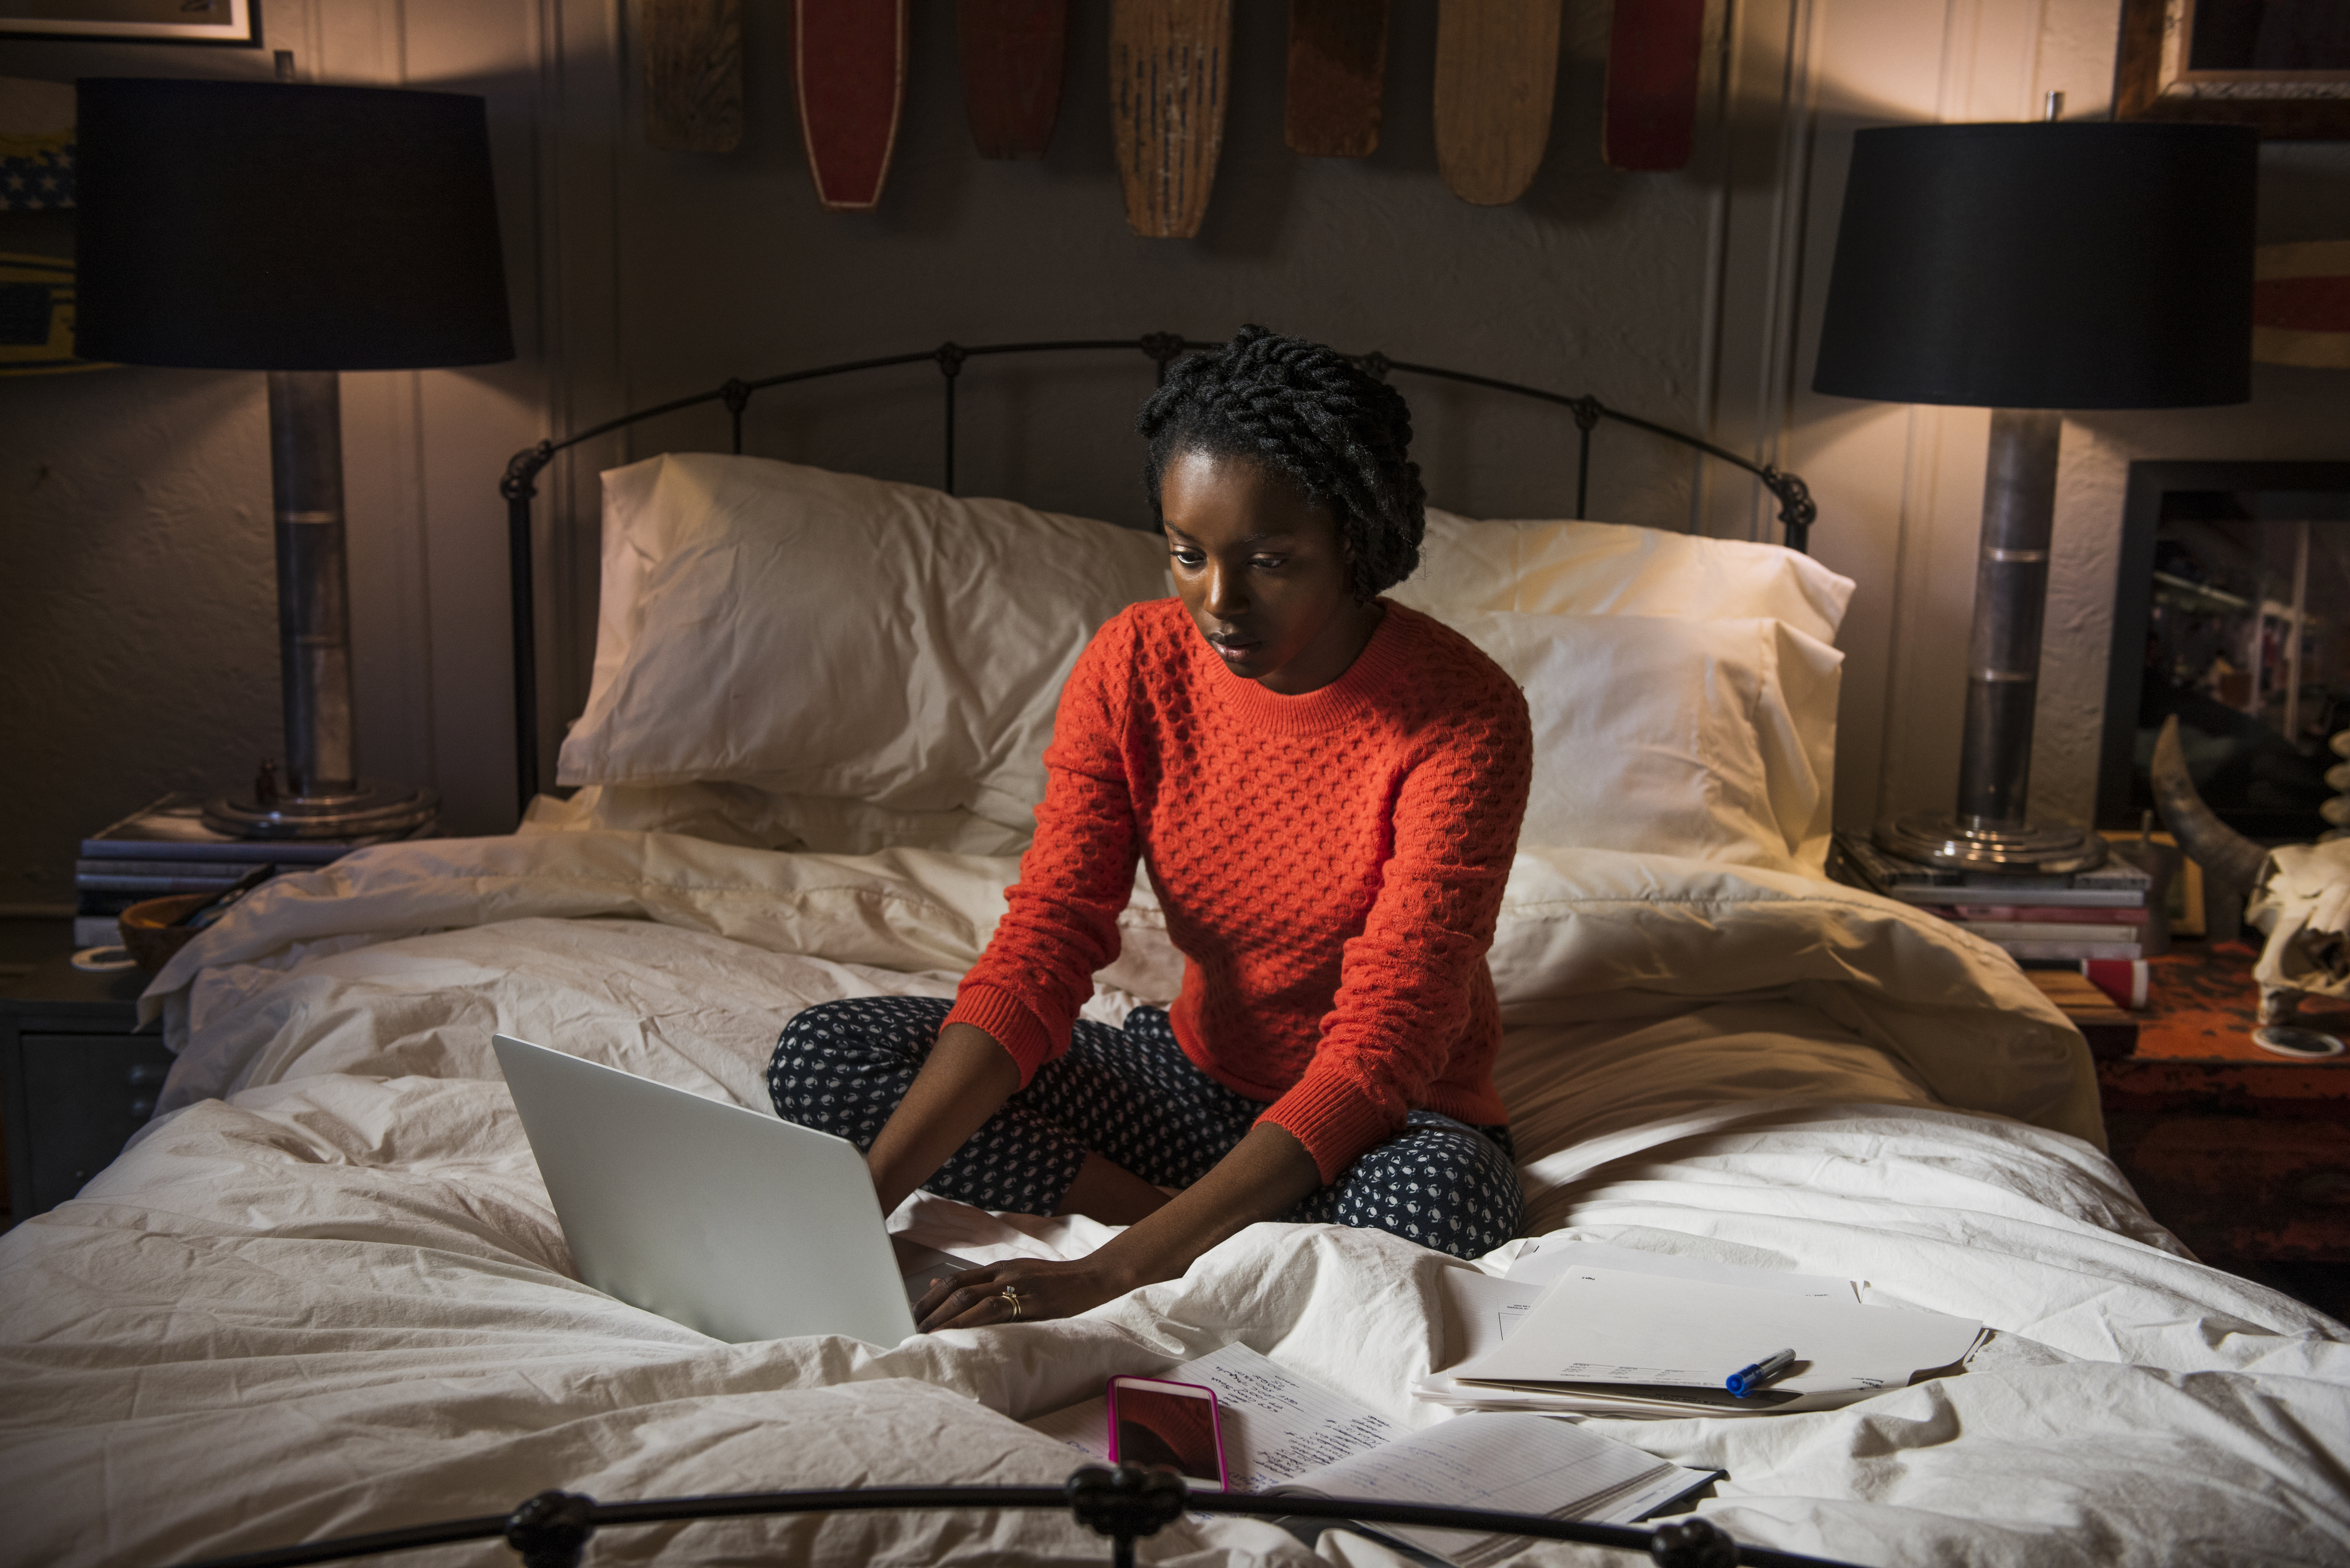 A woman sitting on a  bed with a laptop and papers, looking focused, possibly working or studying late at night